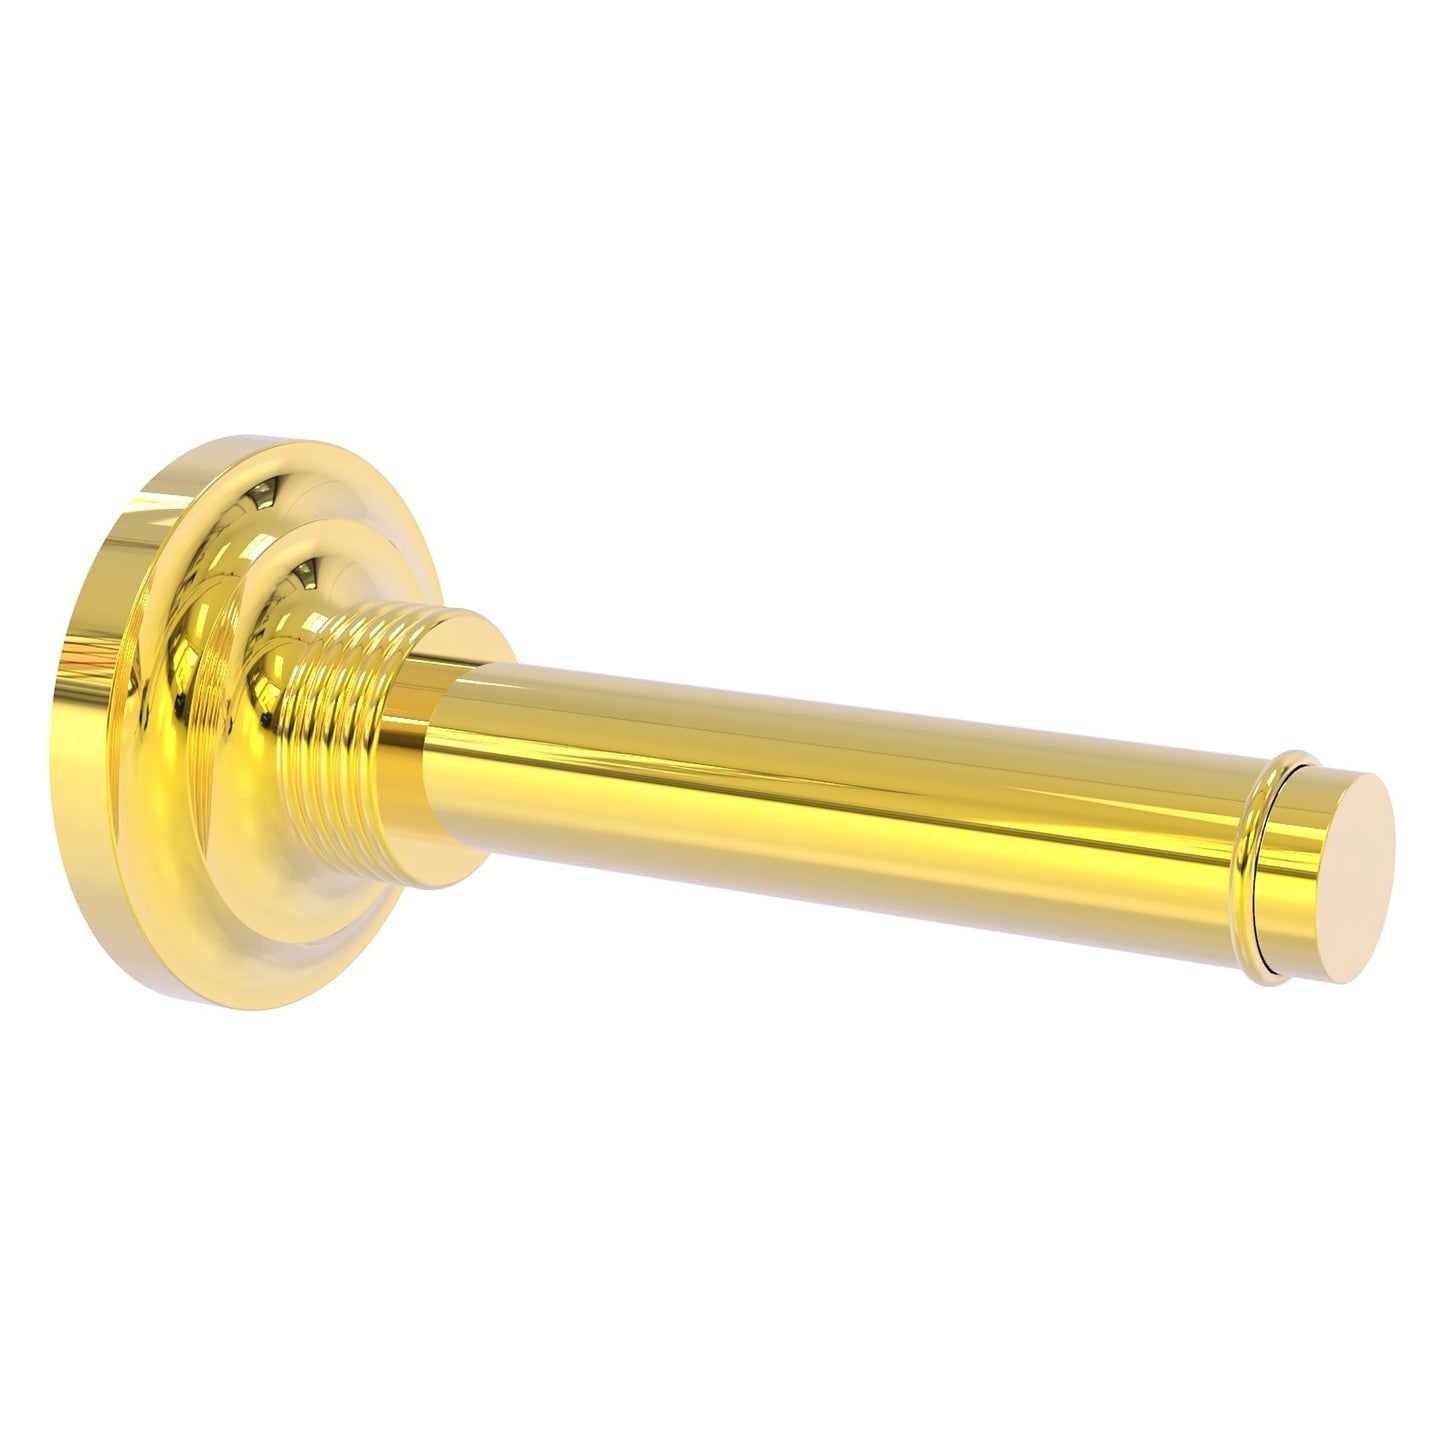 Allied Brass Que New 6.4" x 3" Polished Brass Solid Brass Horizontal Reserve Roll Toilet Paper Holder